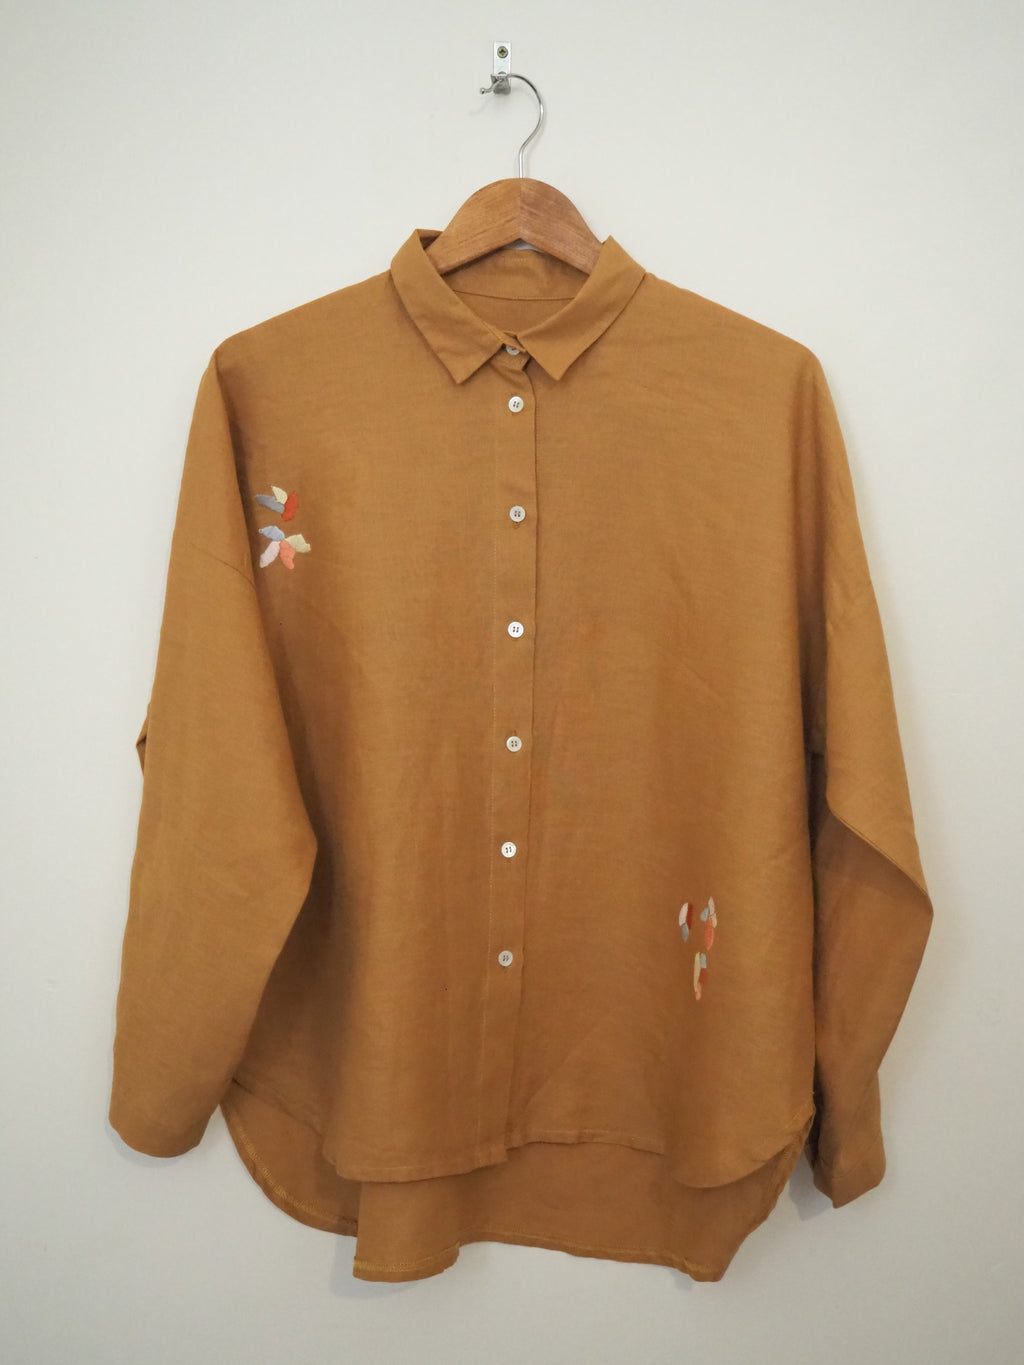 Tosca shirt - Embroidered Honey